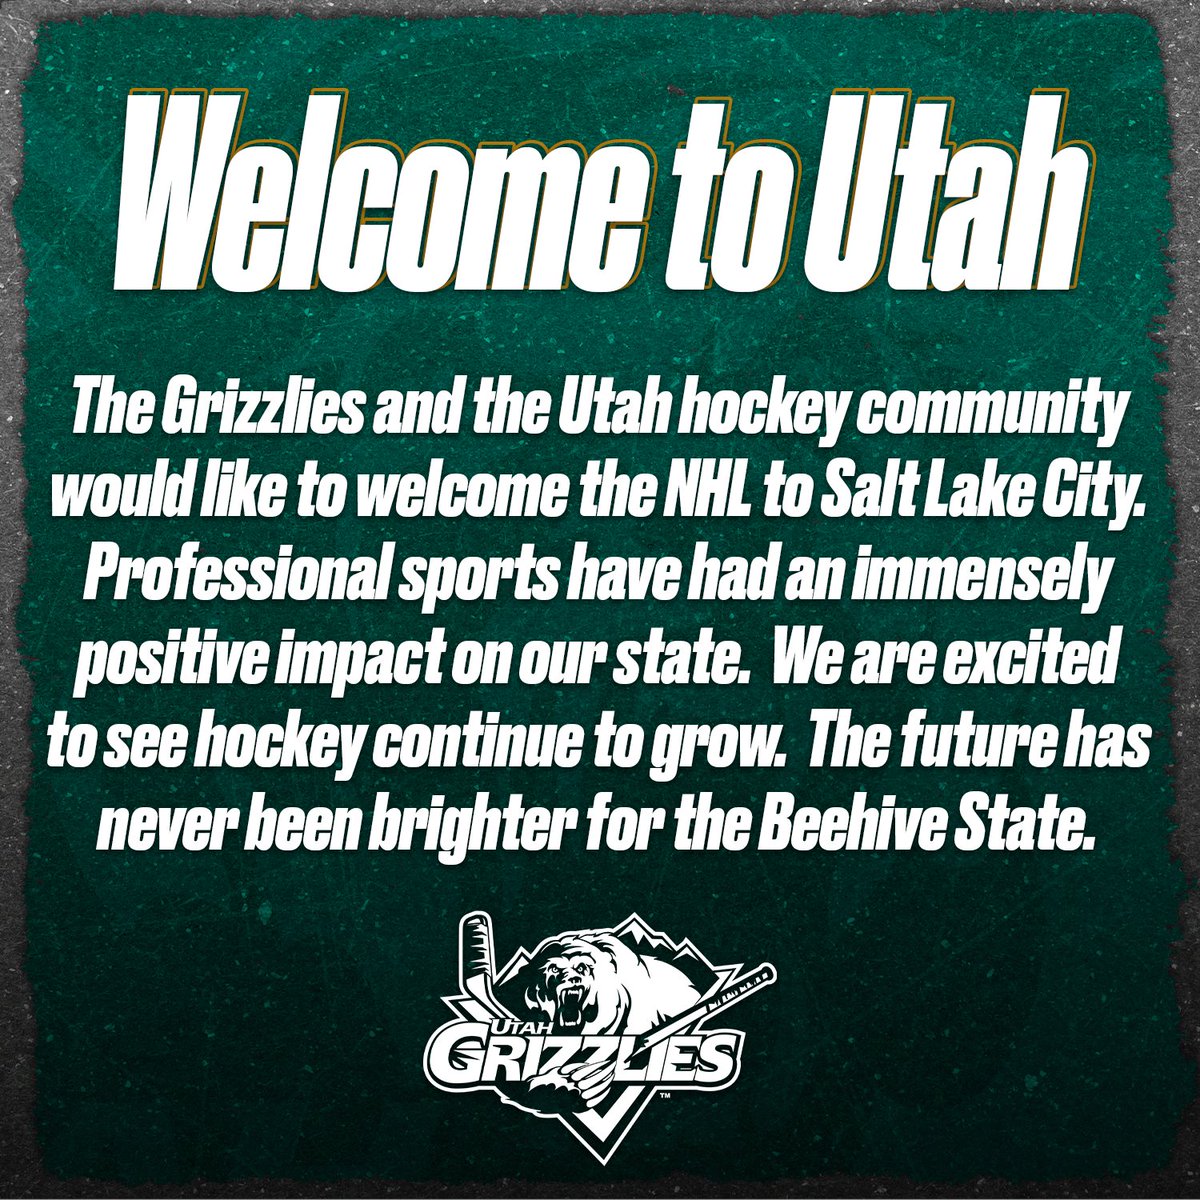 An official statement from the Utah Grizzlies